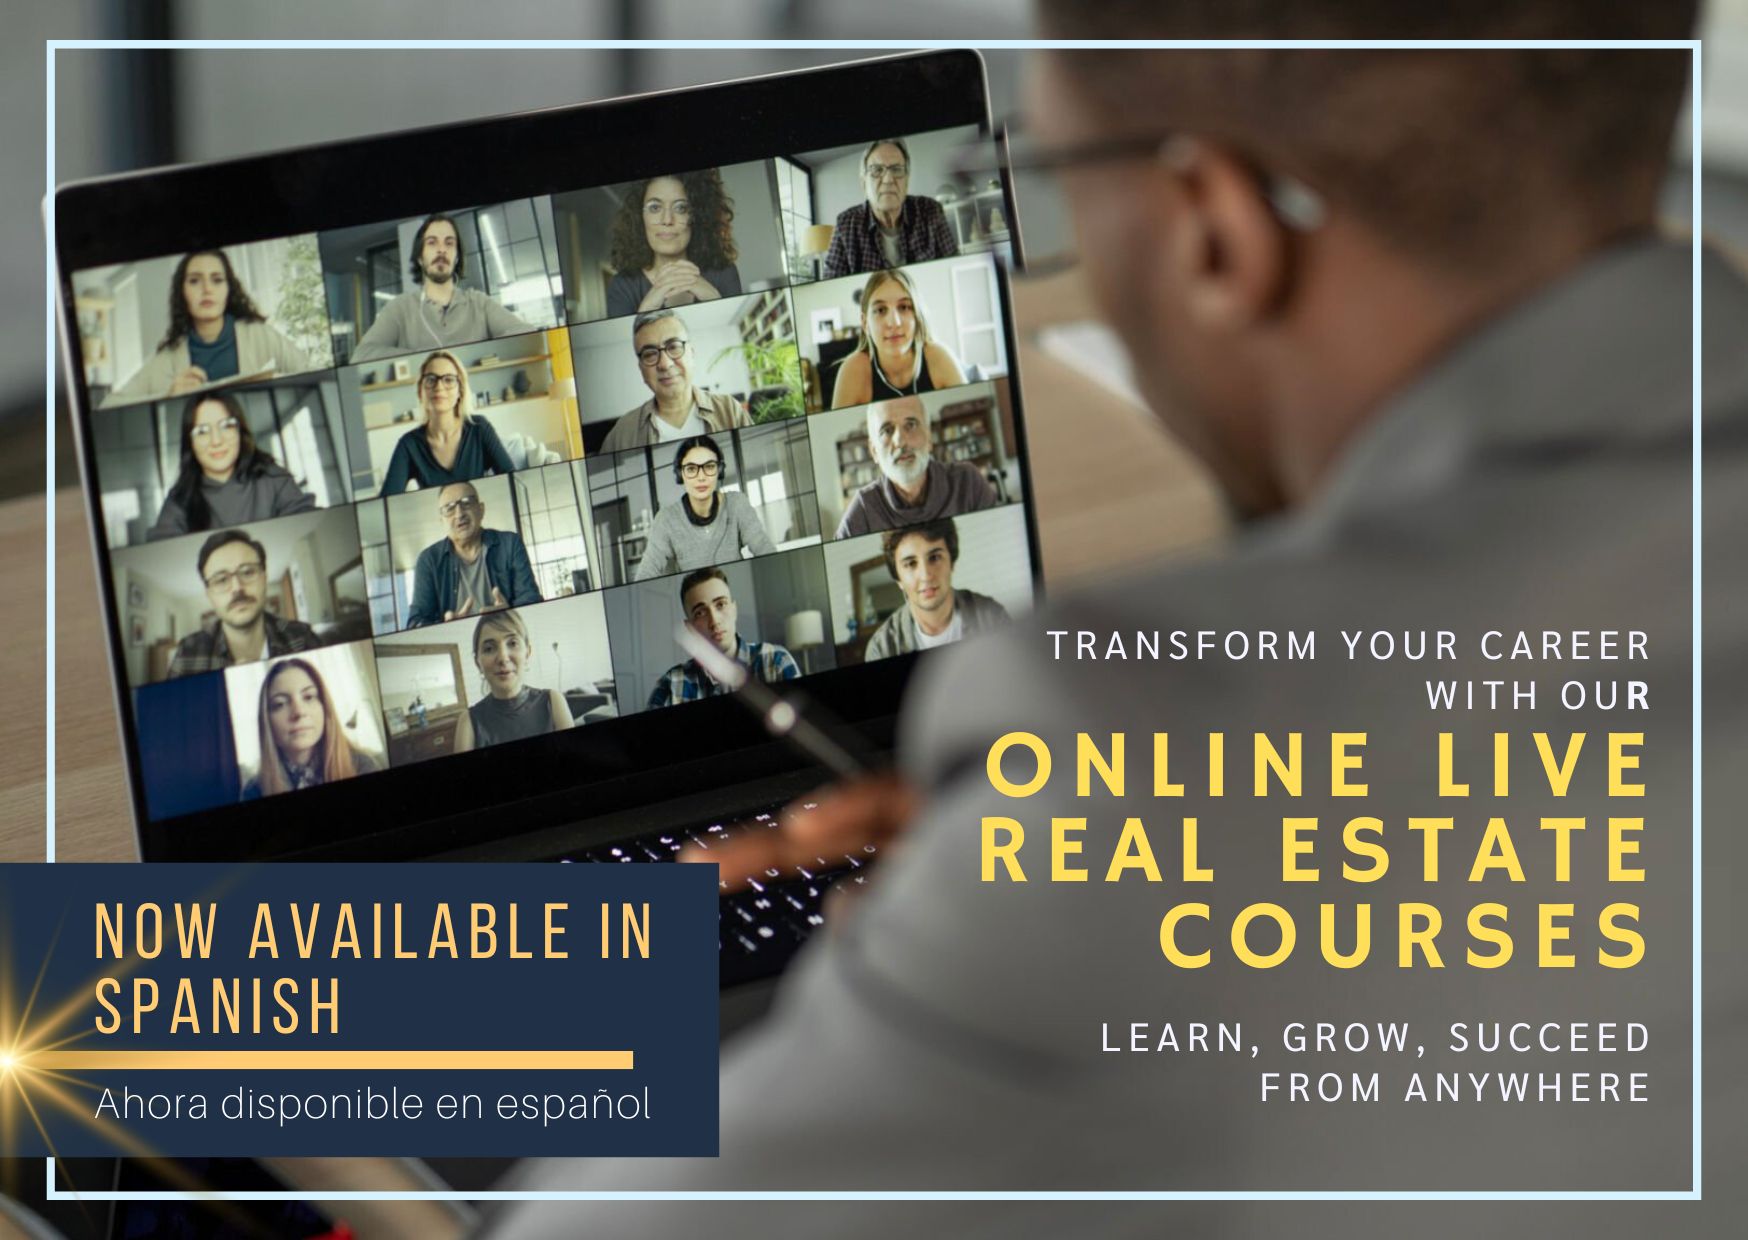 Online live real estate courses